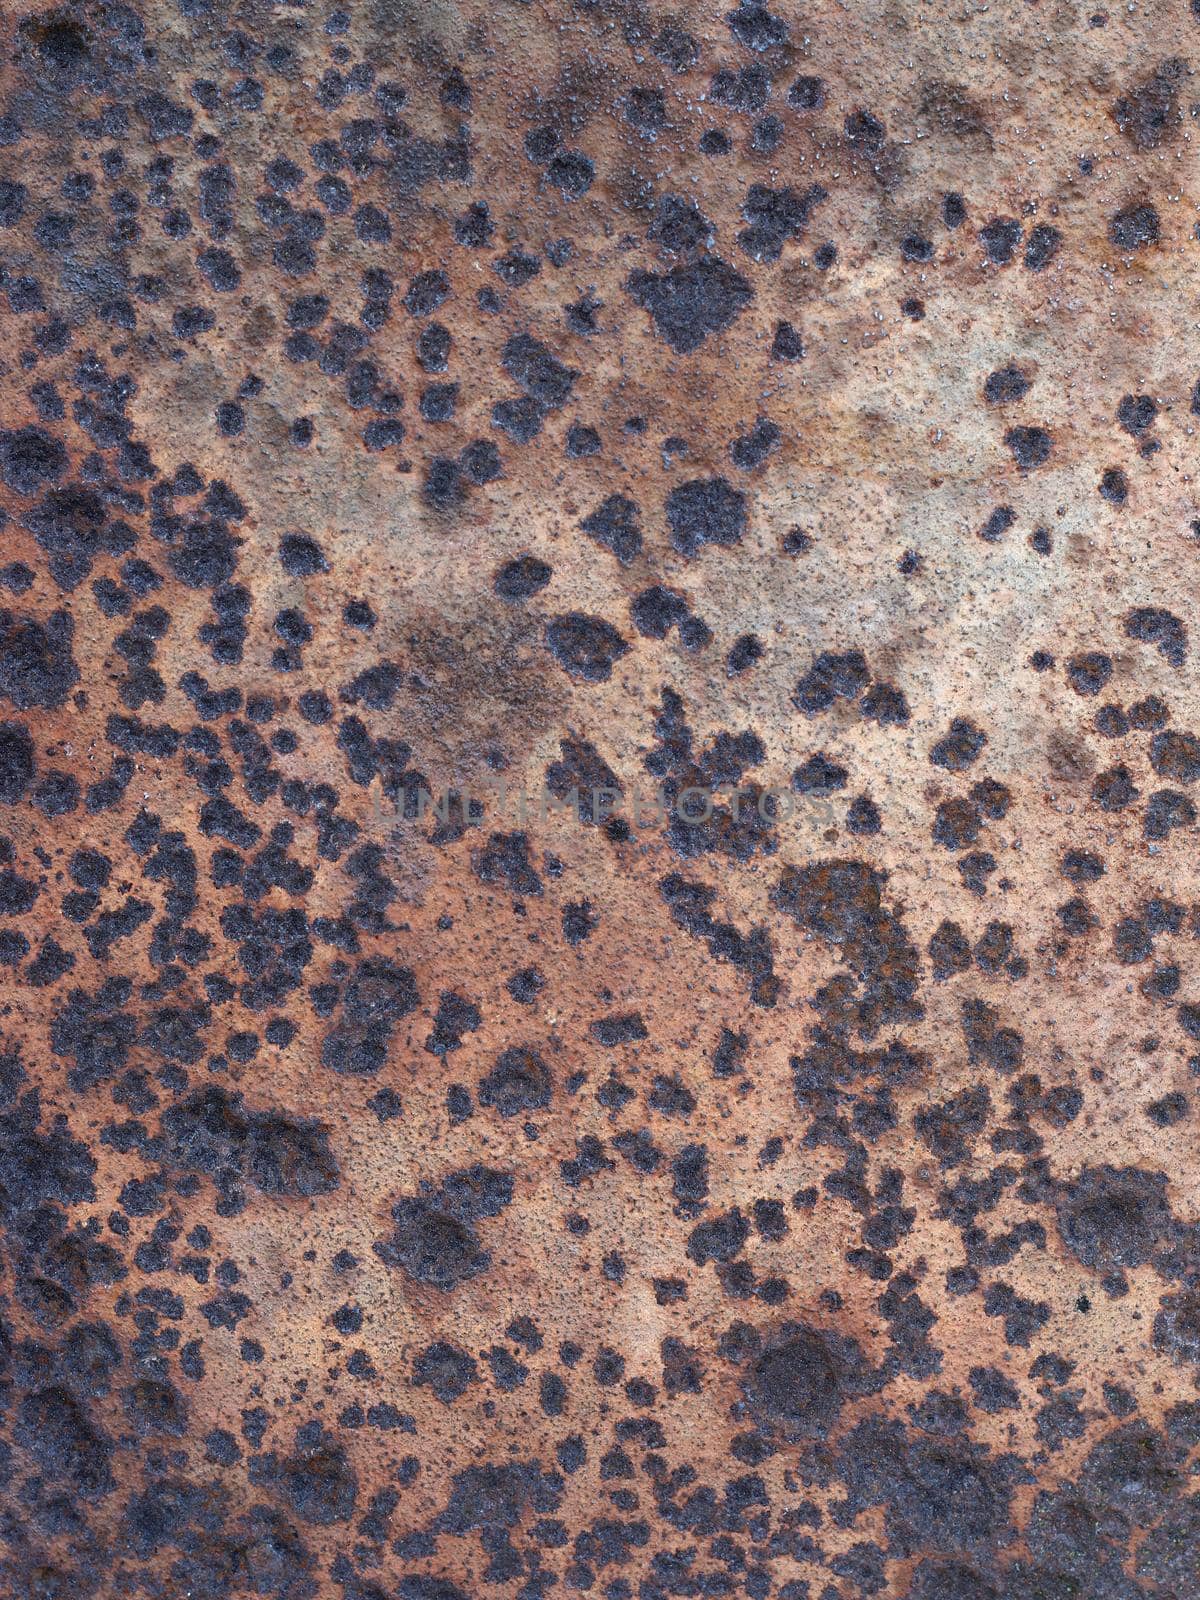 Old corroded surface of the metal plate by Mibuch